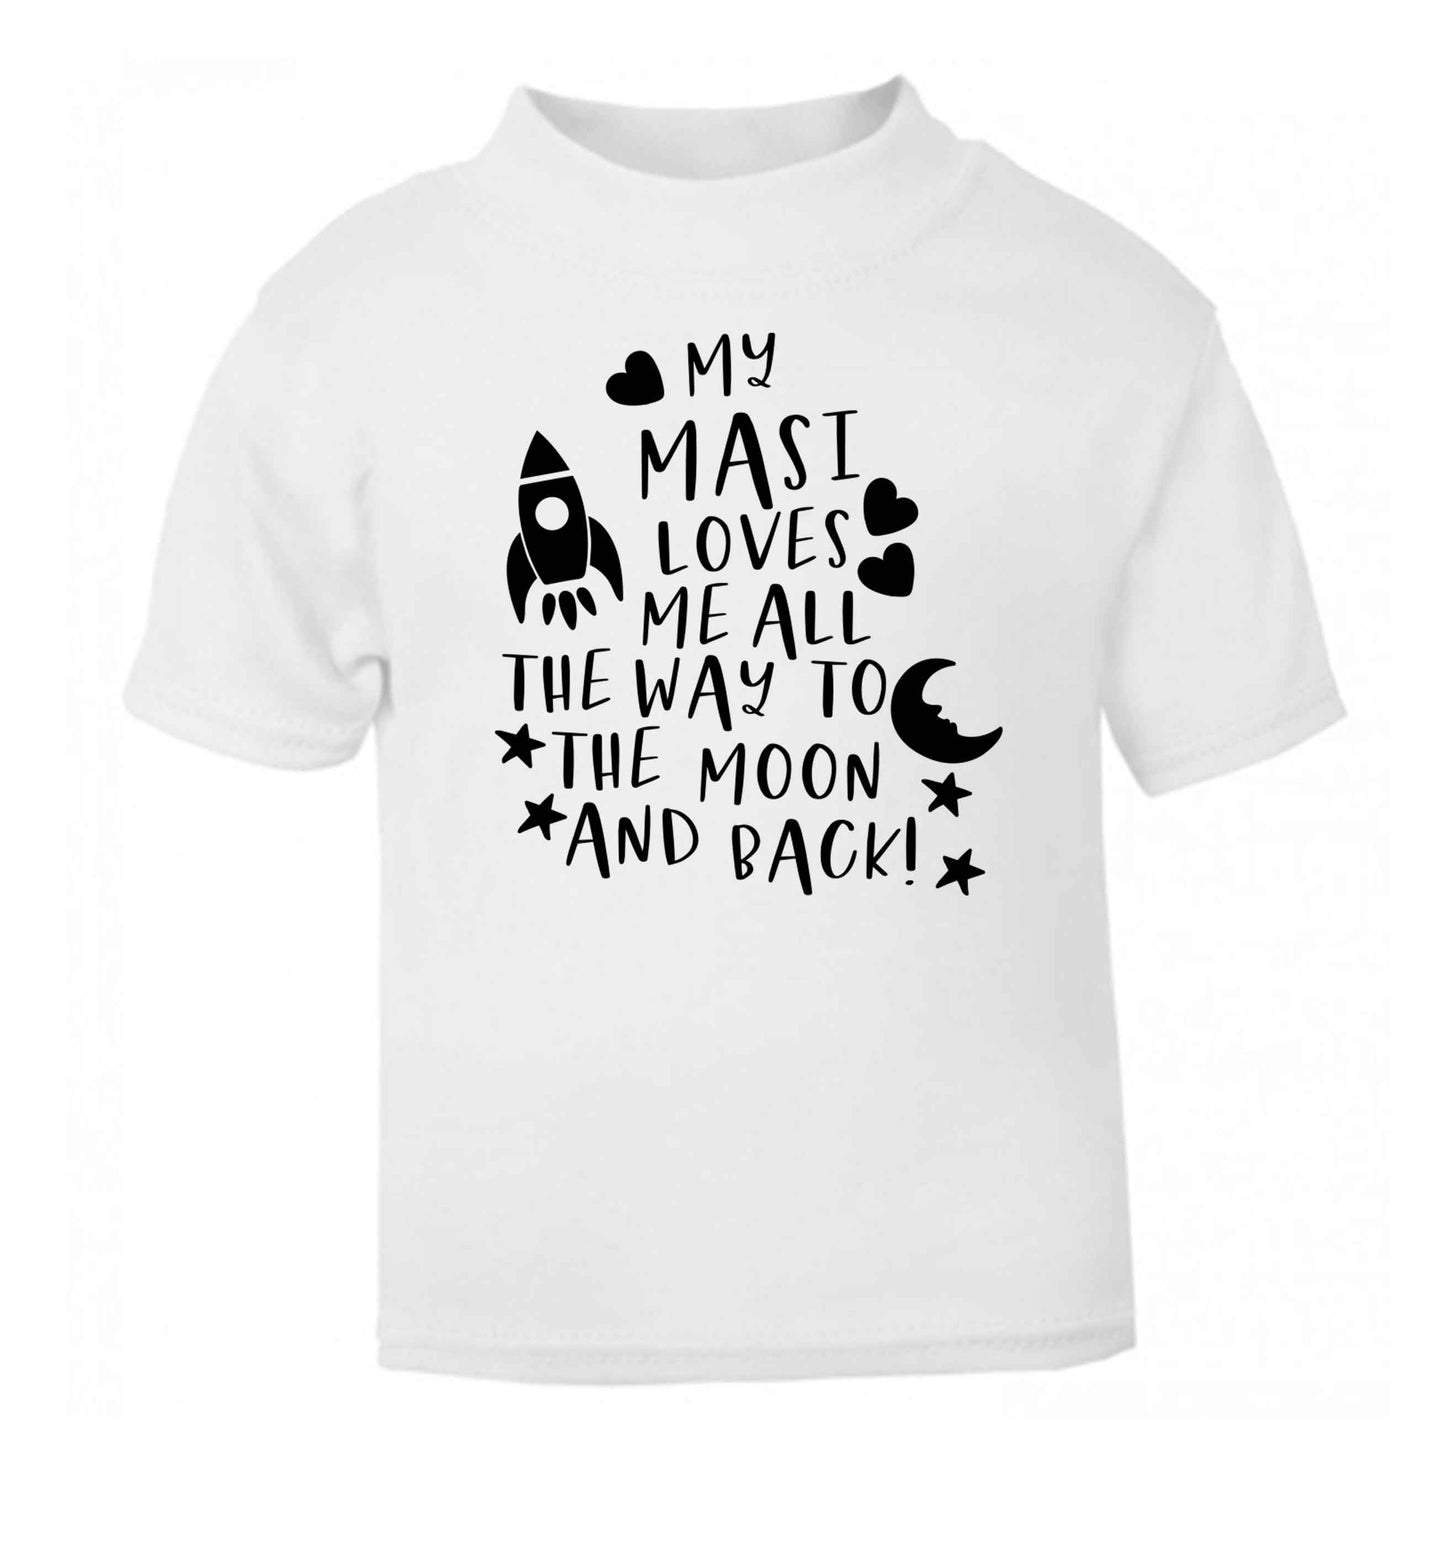 My masi loves me all the way to the moon and back white Baby Toddler Tshirt 2 Years